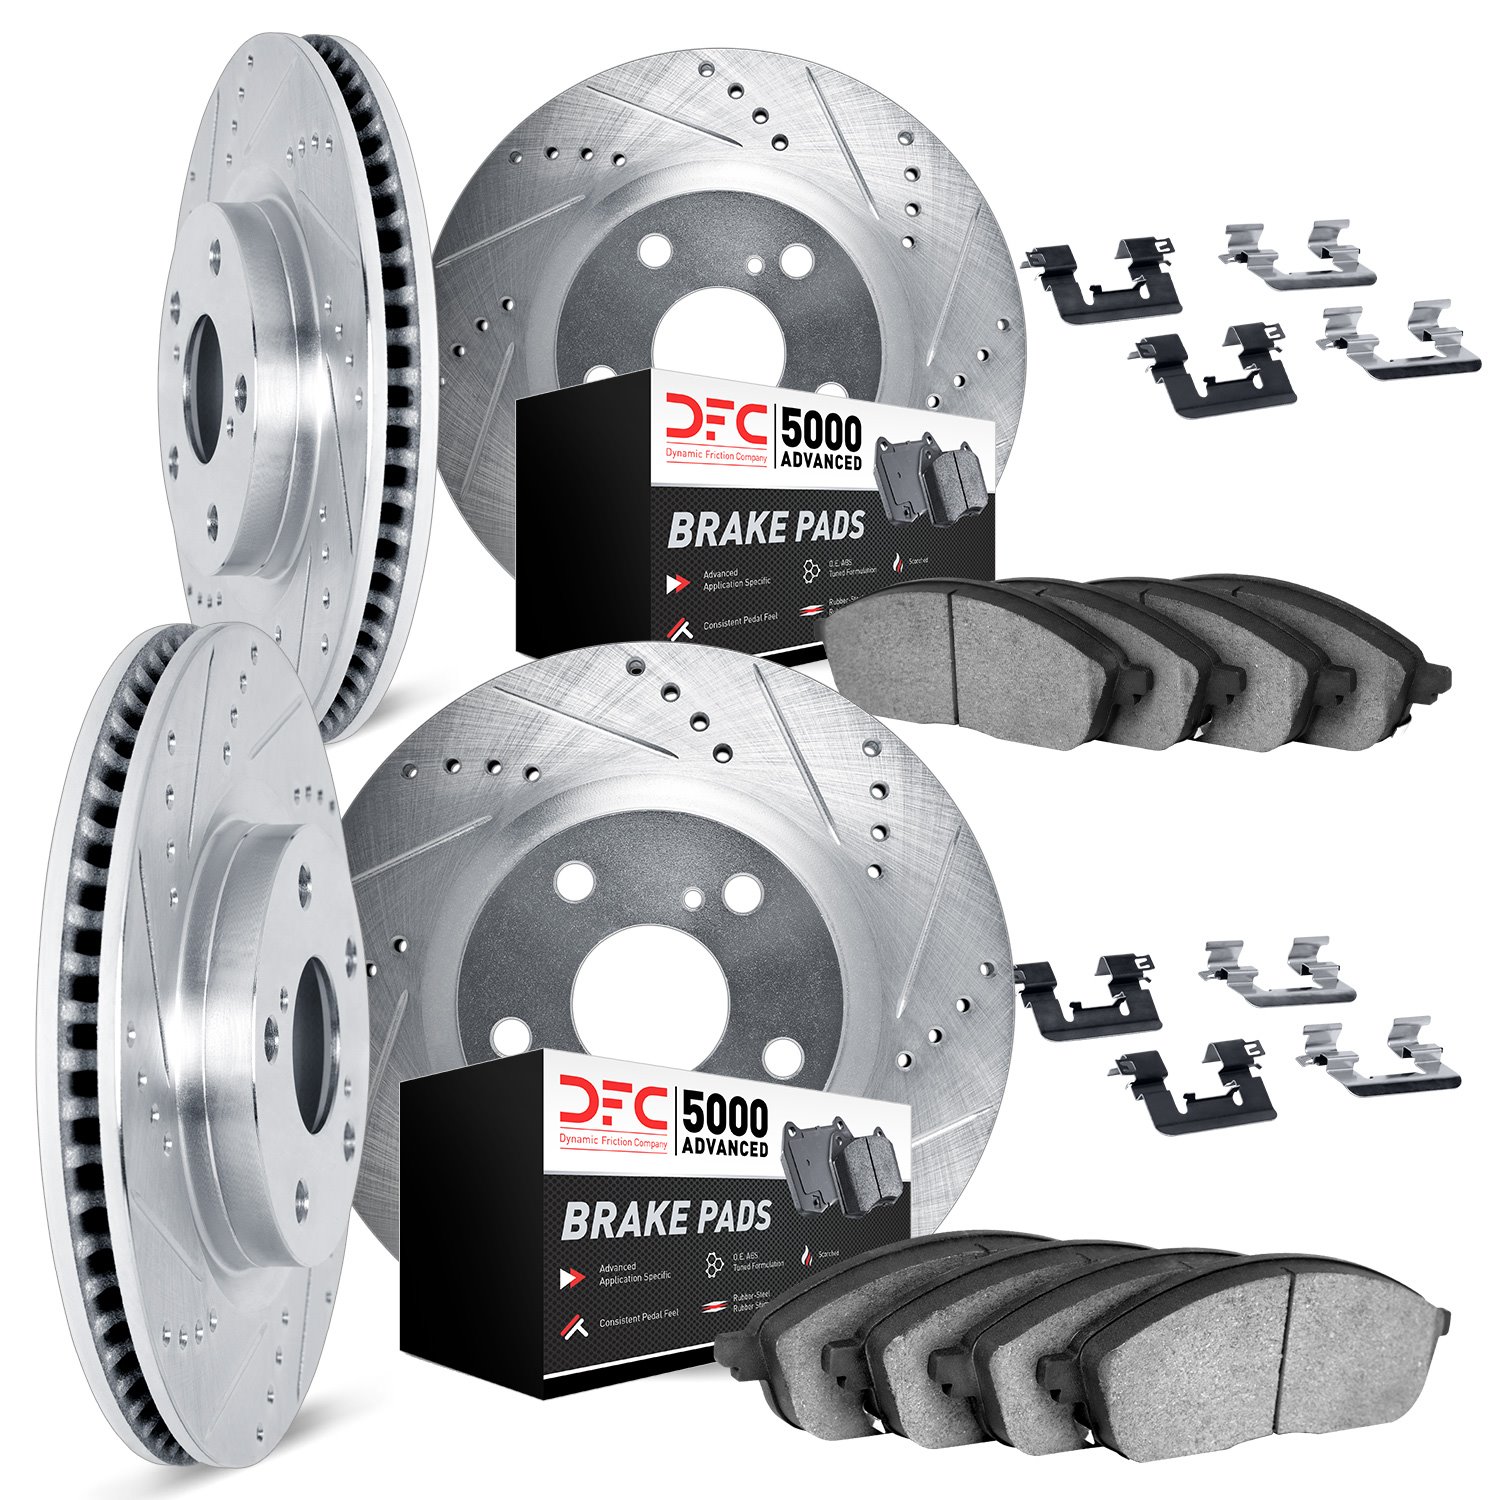 7514-42022 Drilled/Slotted Brake Rotors w/5000 Advanced Brake Pads Kit & Hardware [Silver], Fits Select Mopar, Position: Front a